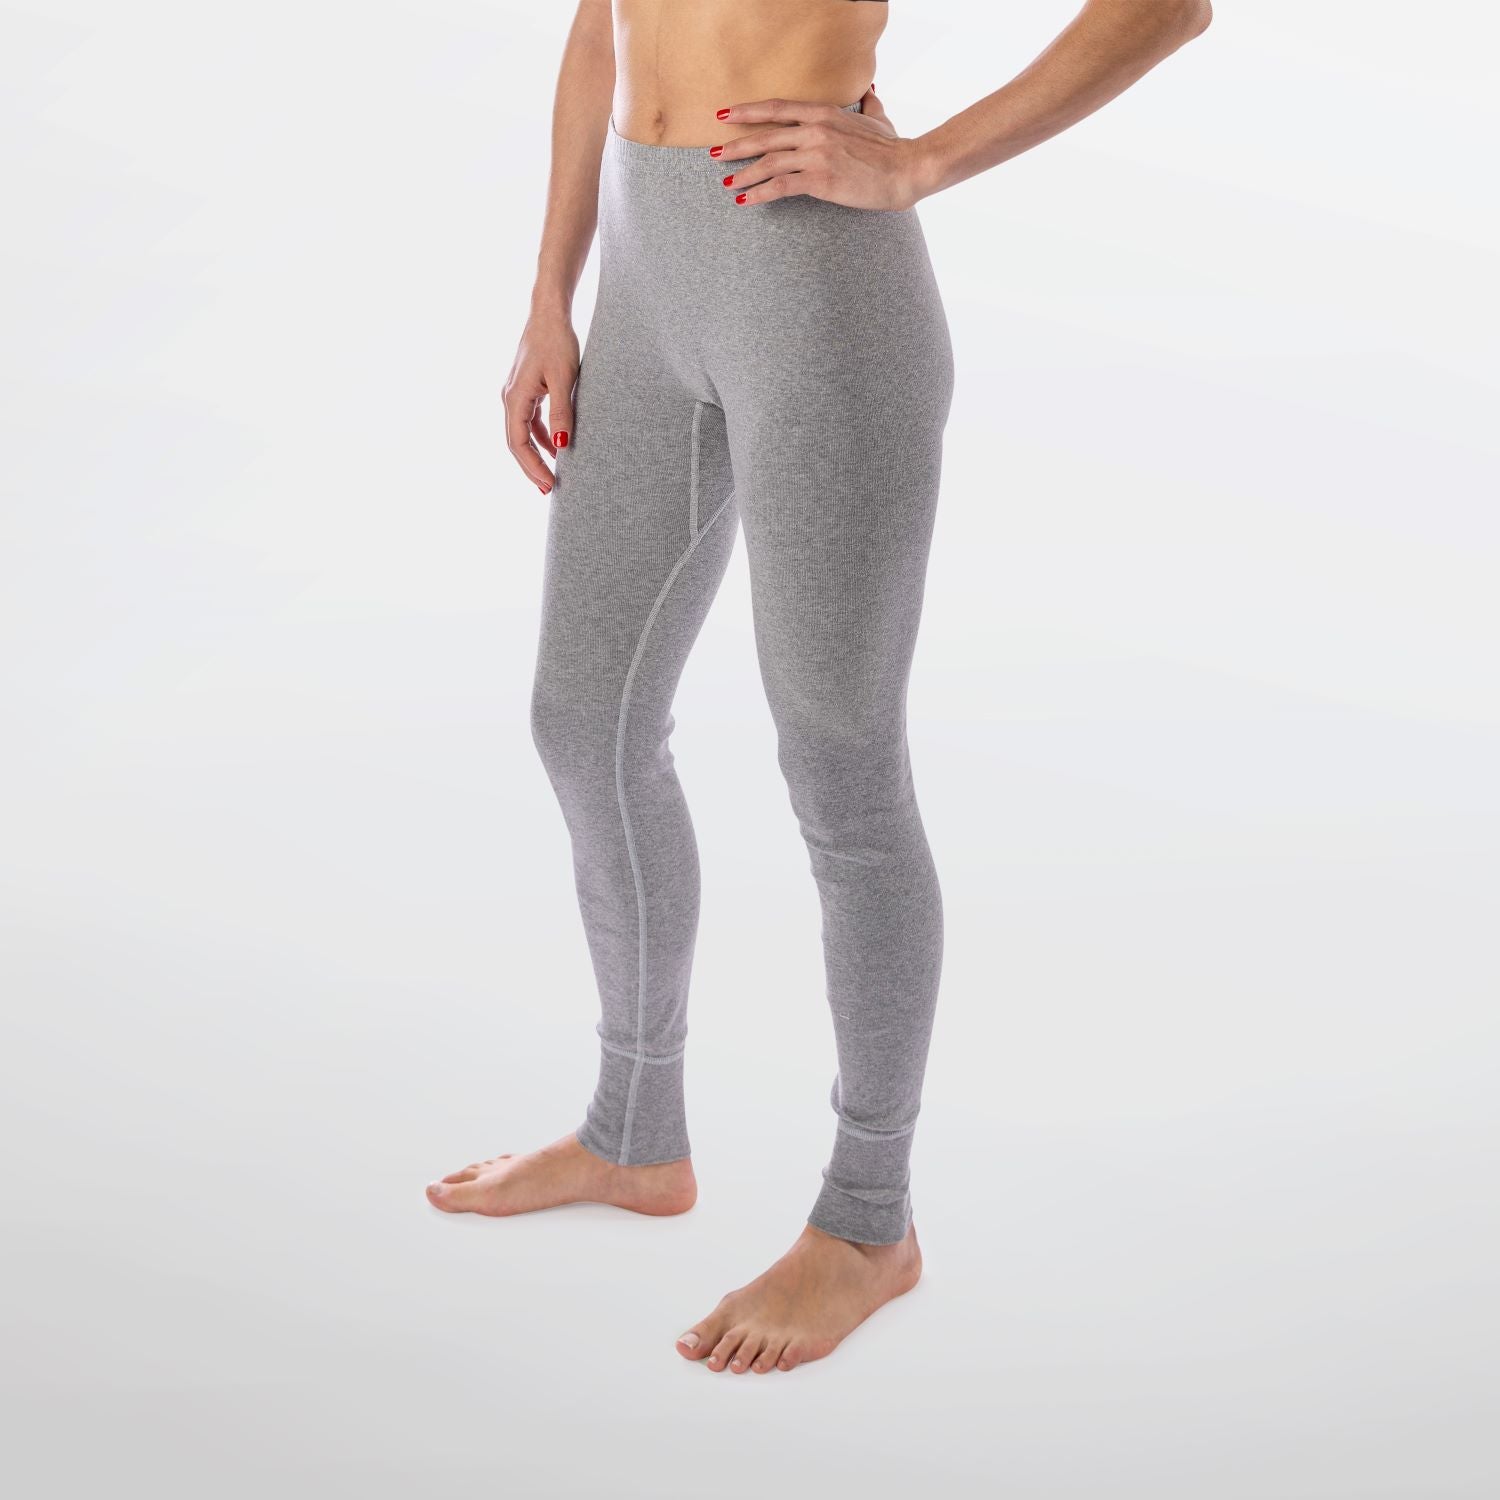 Women’s Leggings Chill Chasers Collection (Cotton Rib) | Stanfields.com